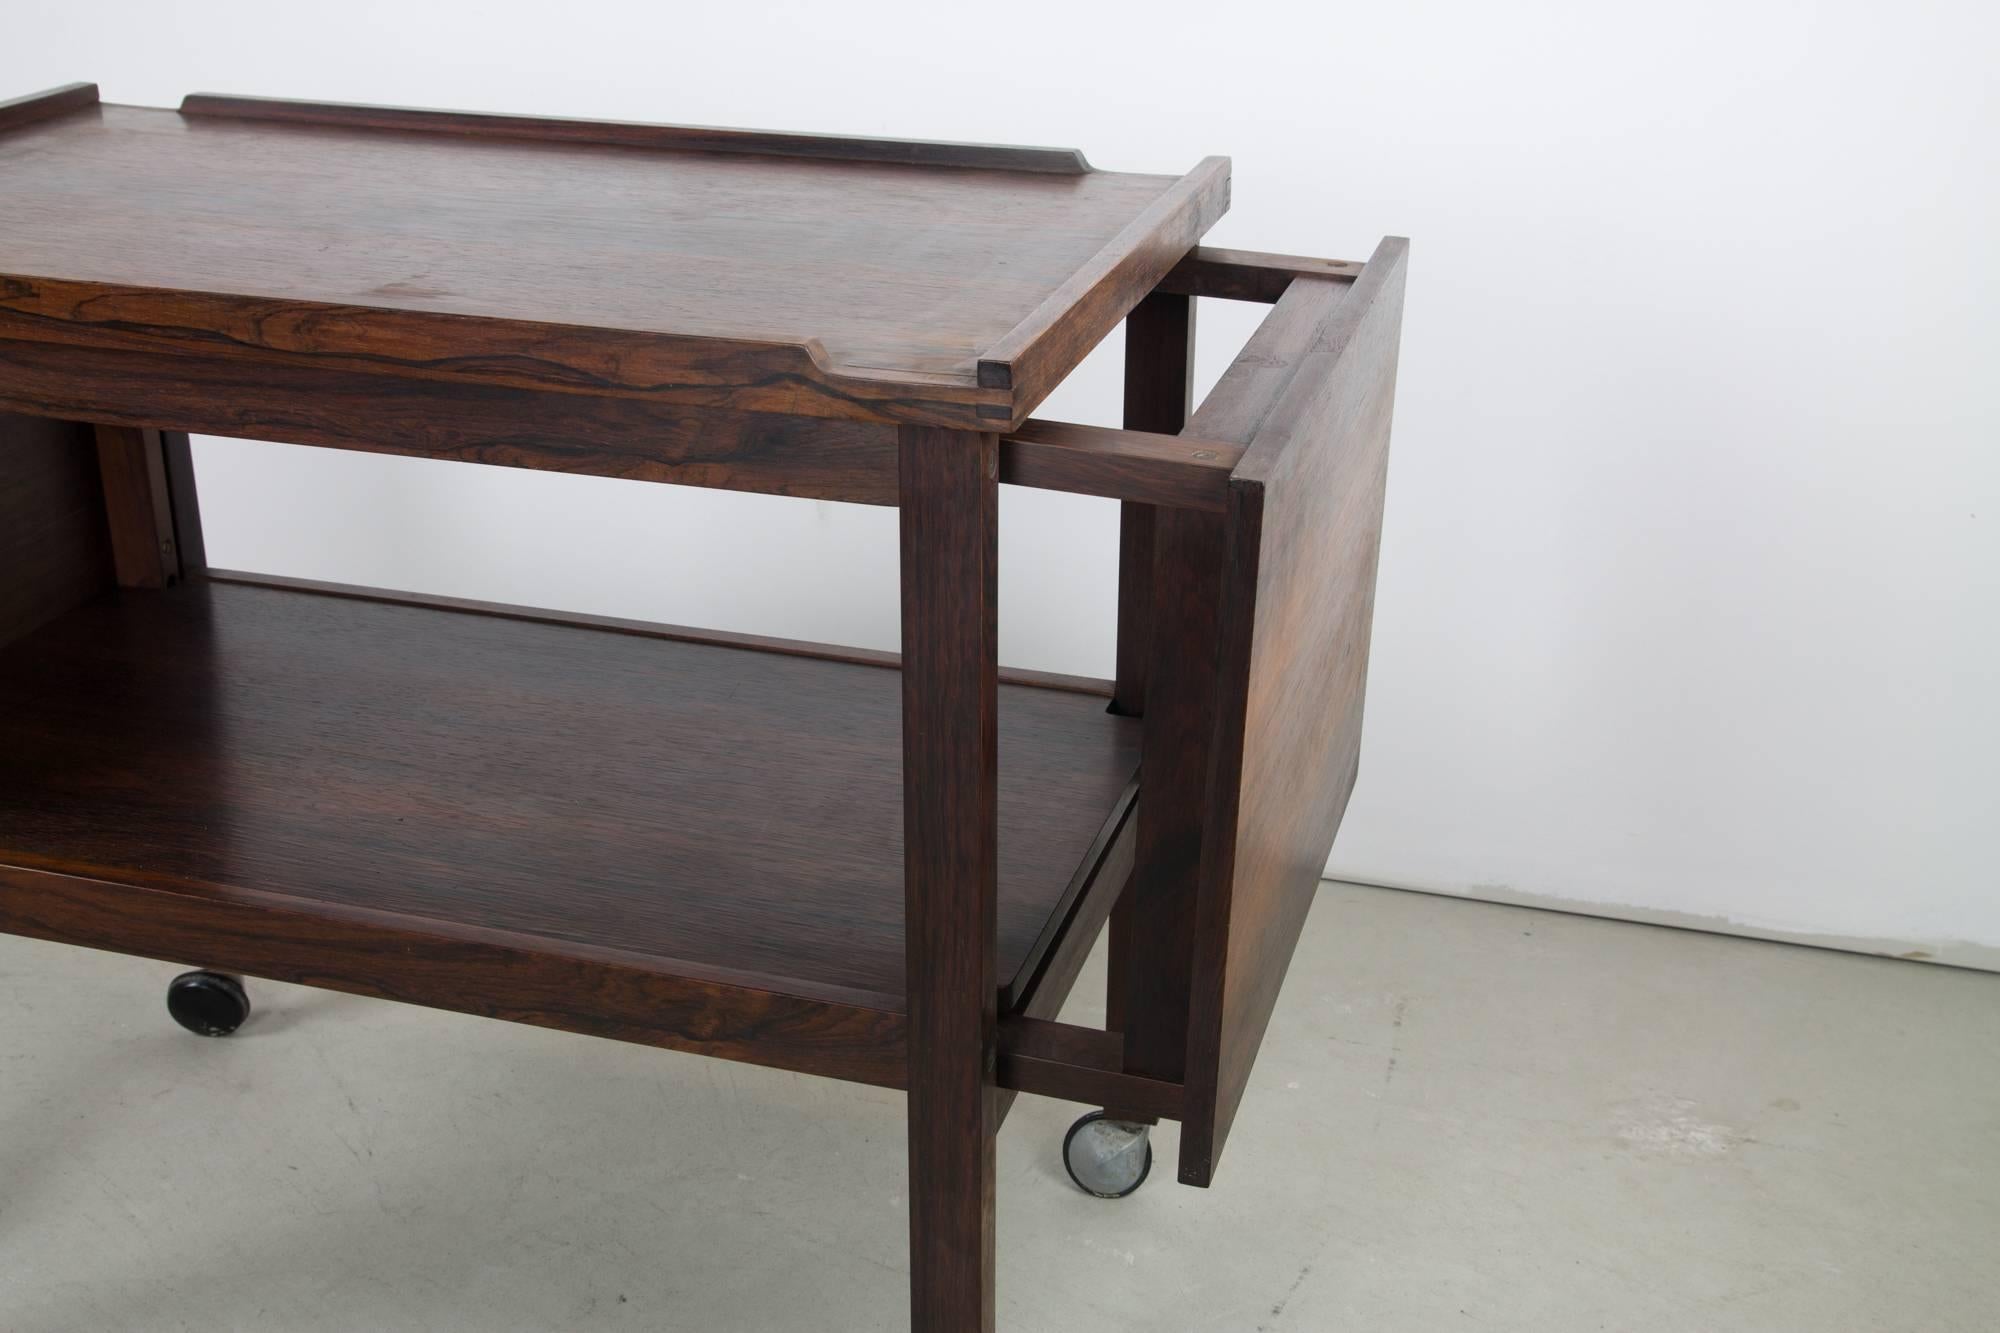 A cunning convertible rosewood bar cart with concealed side tables which tuck into either end. The cart features solid rosewood construction and hand-cut joinery and is set atop smooth orbit casters.